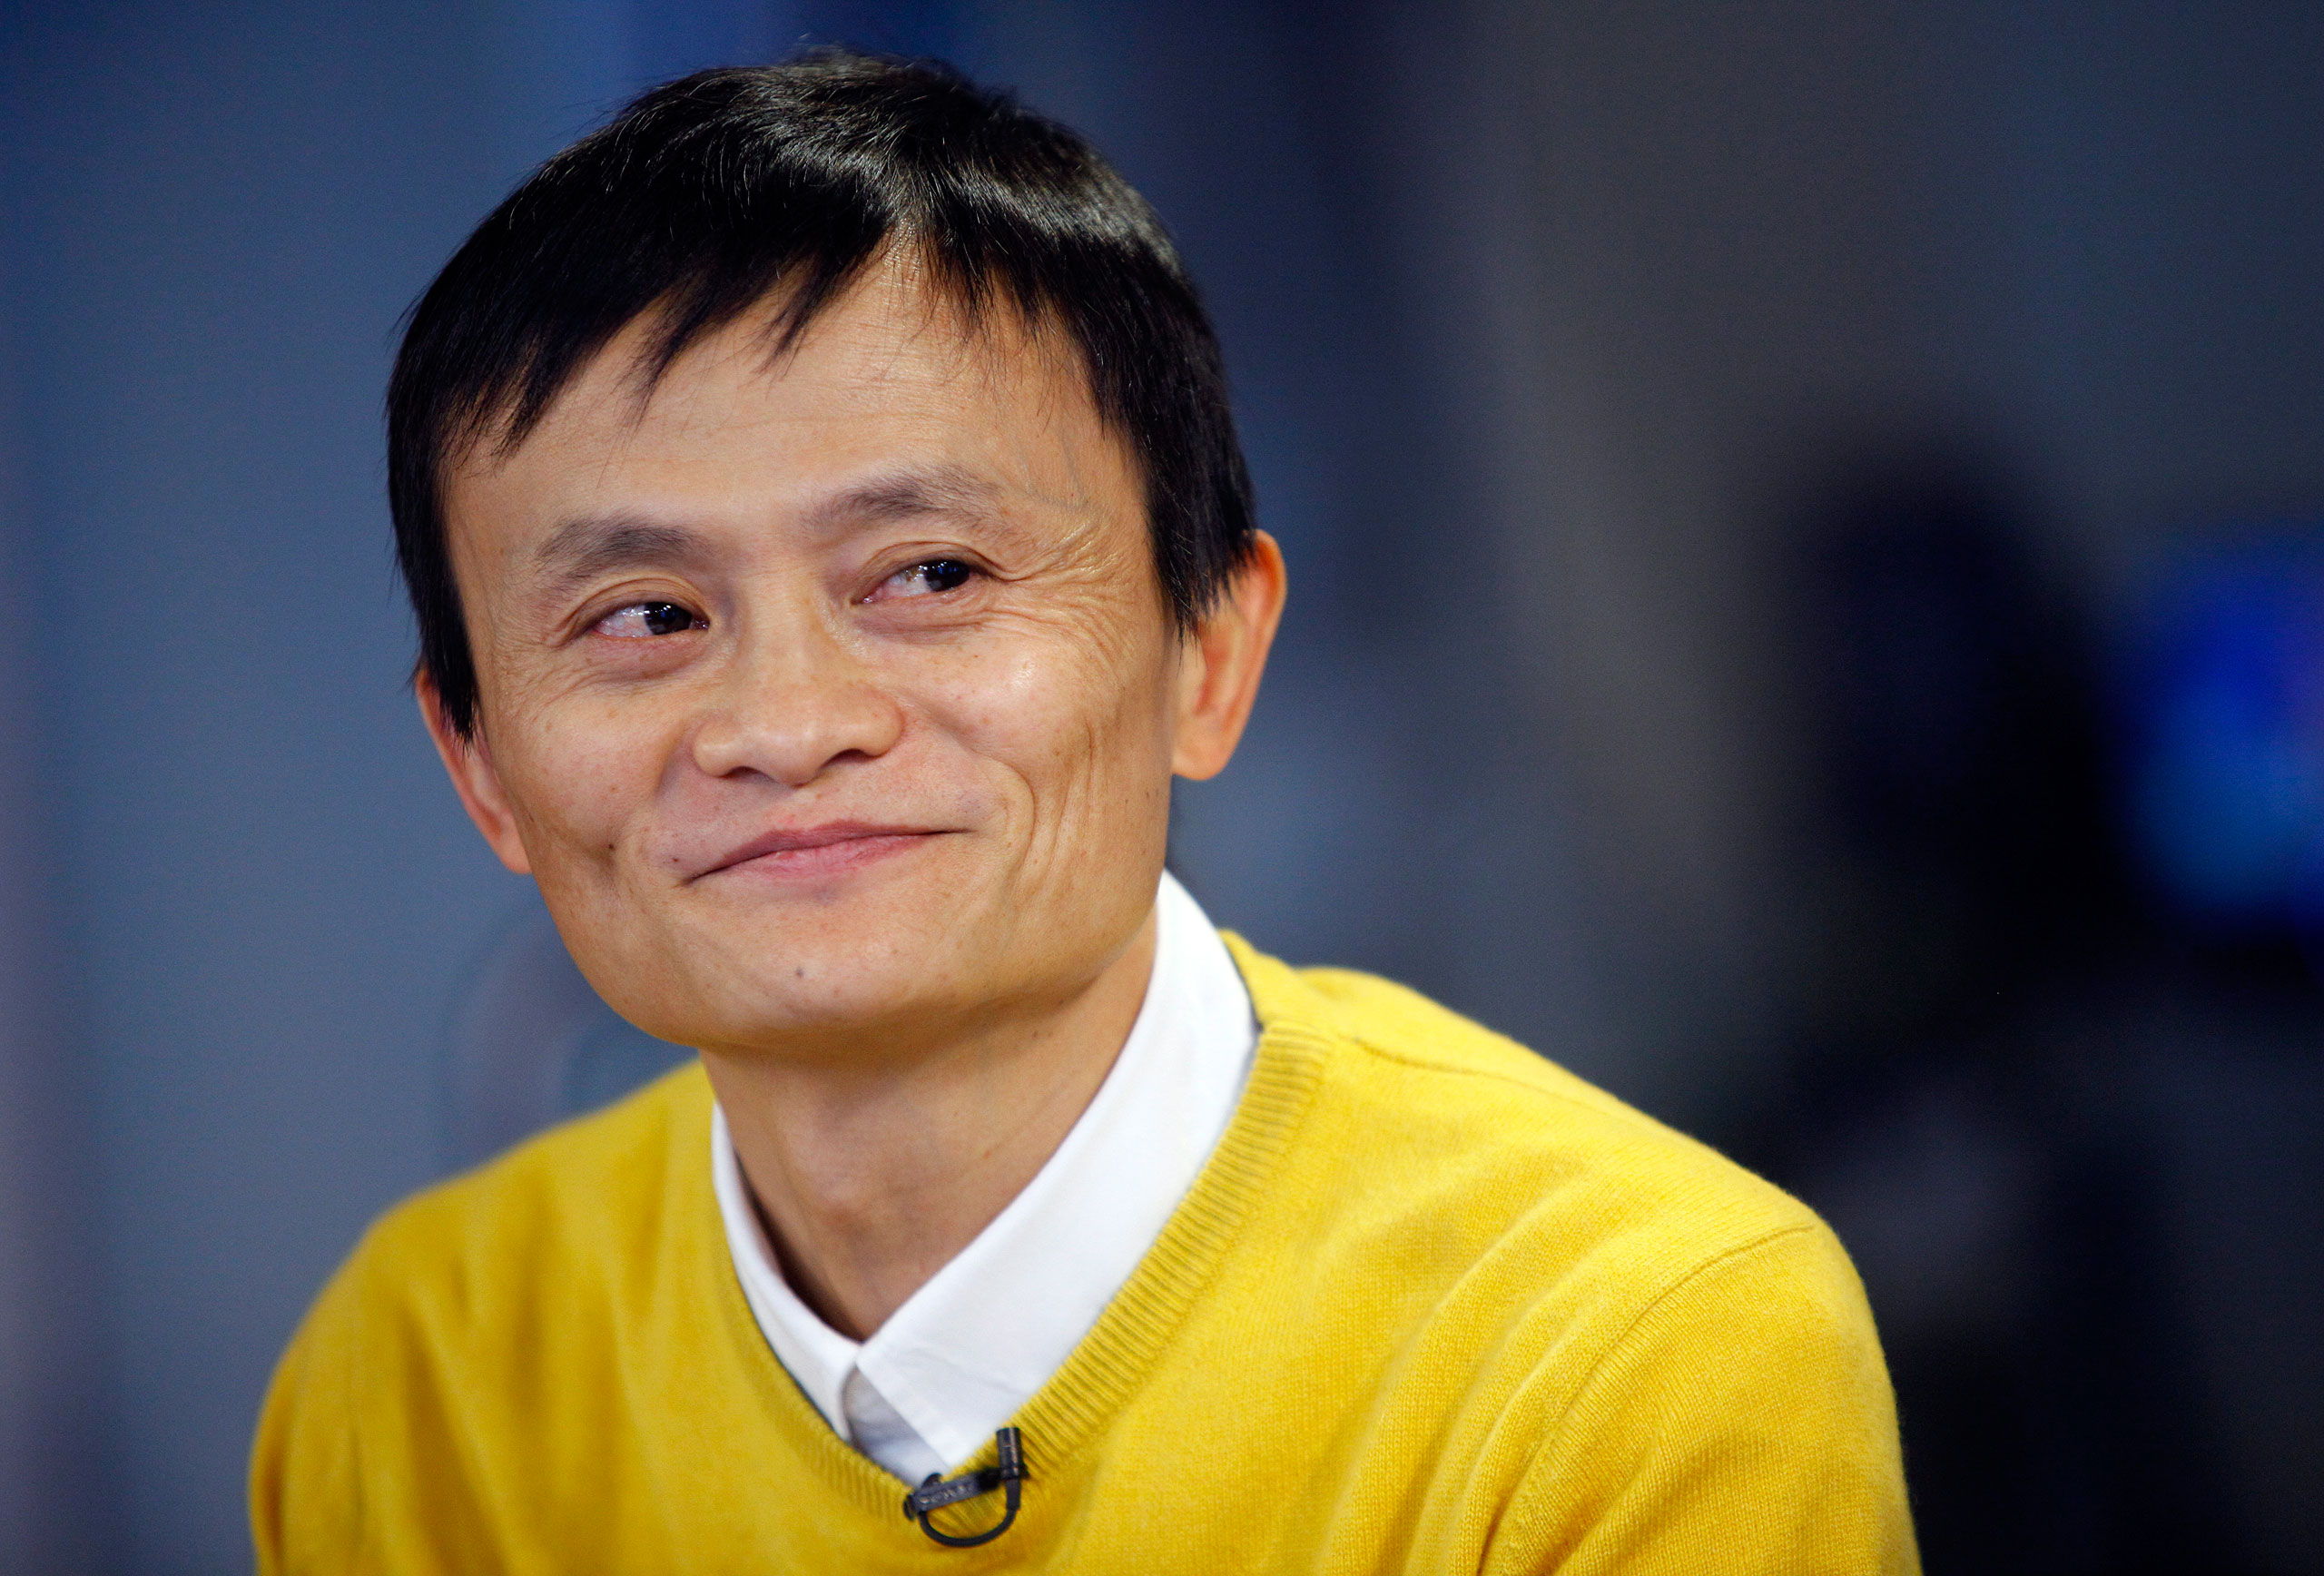 Alibaba CEO Jack Ma during an interview, in New York City on March 12, 2009.